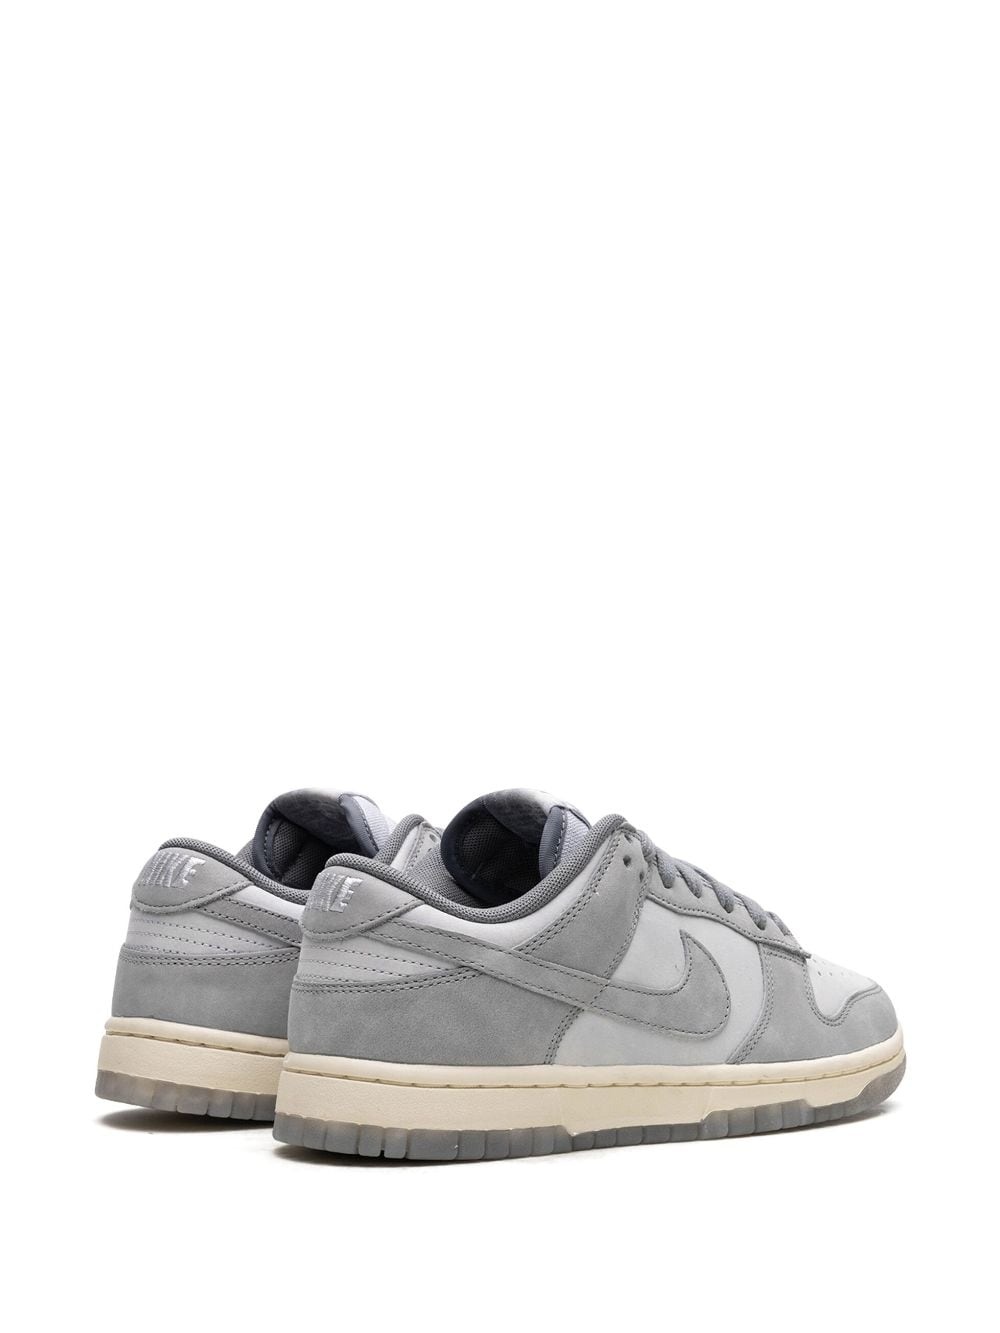 Dunk Low "Cool Grey" sneakers - 3